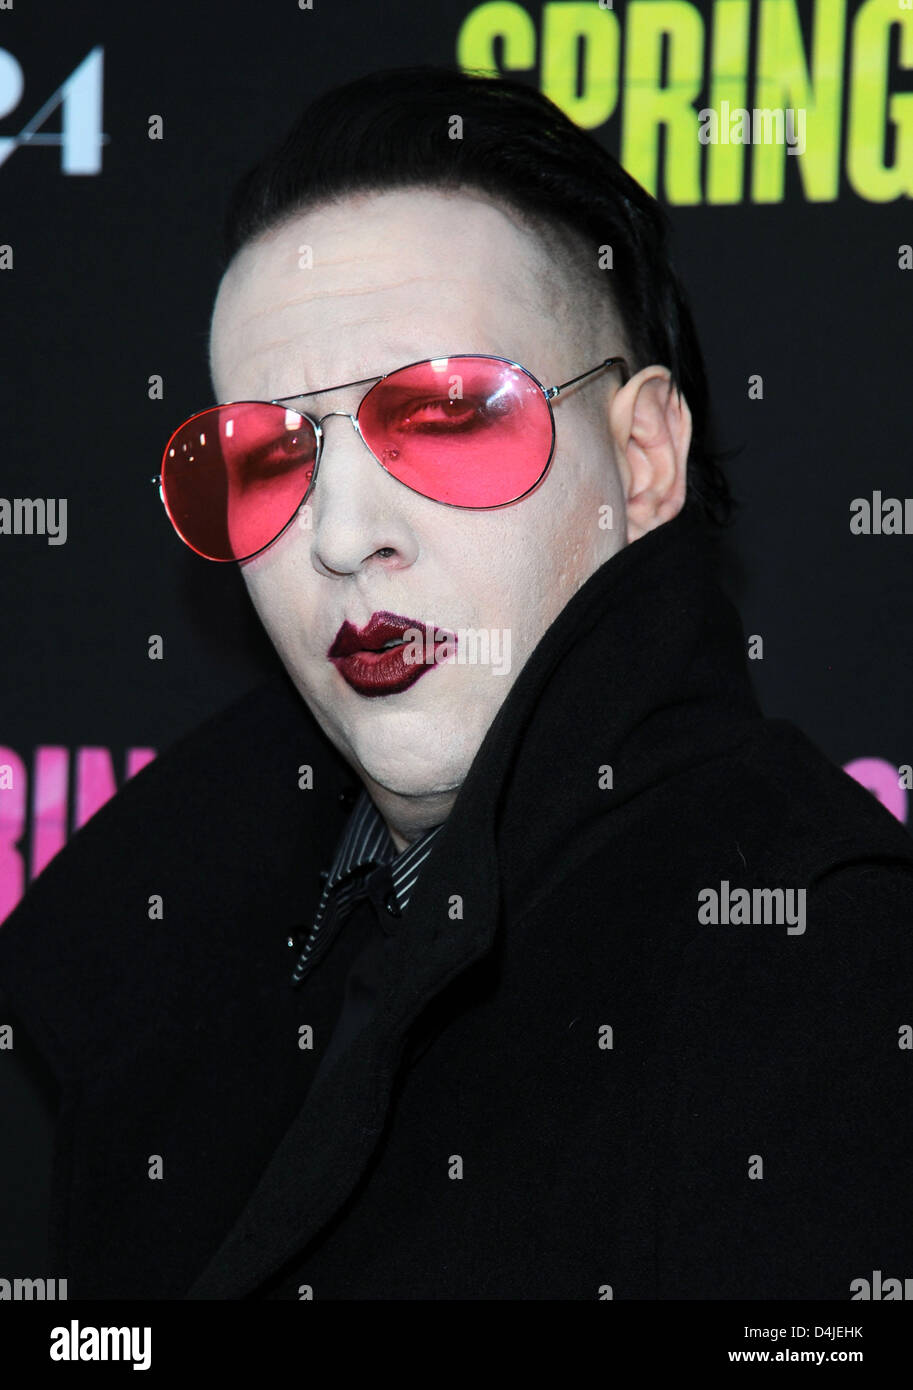 Los Angeles, California, USA. 14th March 2013. Marilyn Manson arrives at the film premiere for 'Spring Breakers' at the Arclight Cinema Hollywood.  Credit:  Sydney Alford / Alamy Live News Stock Photo